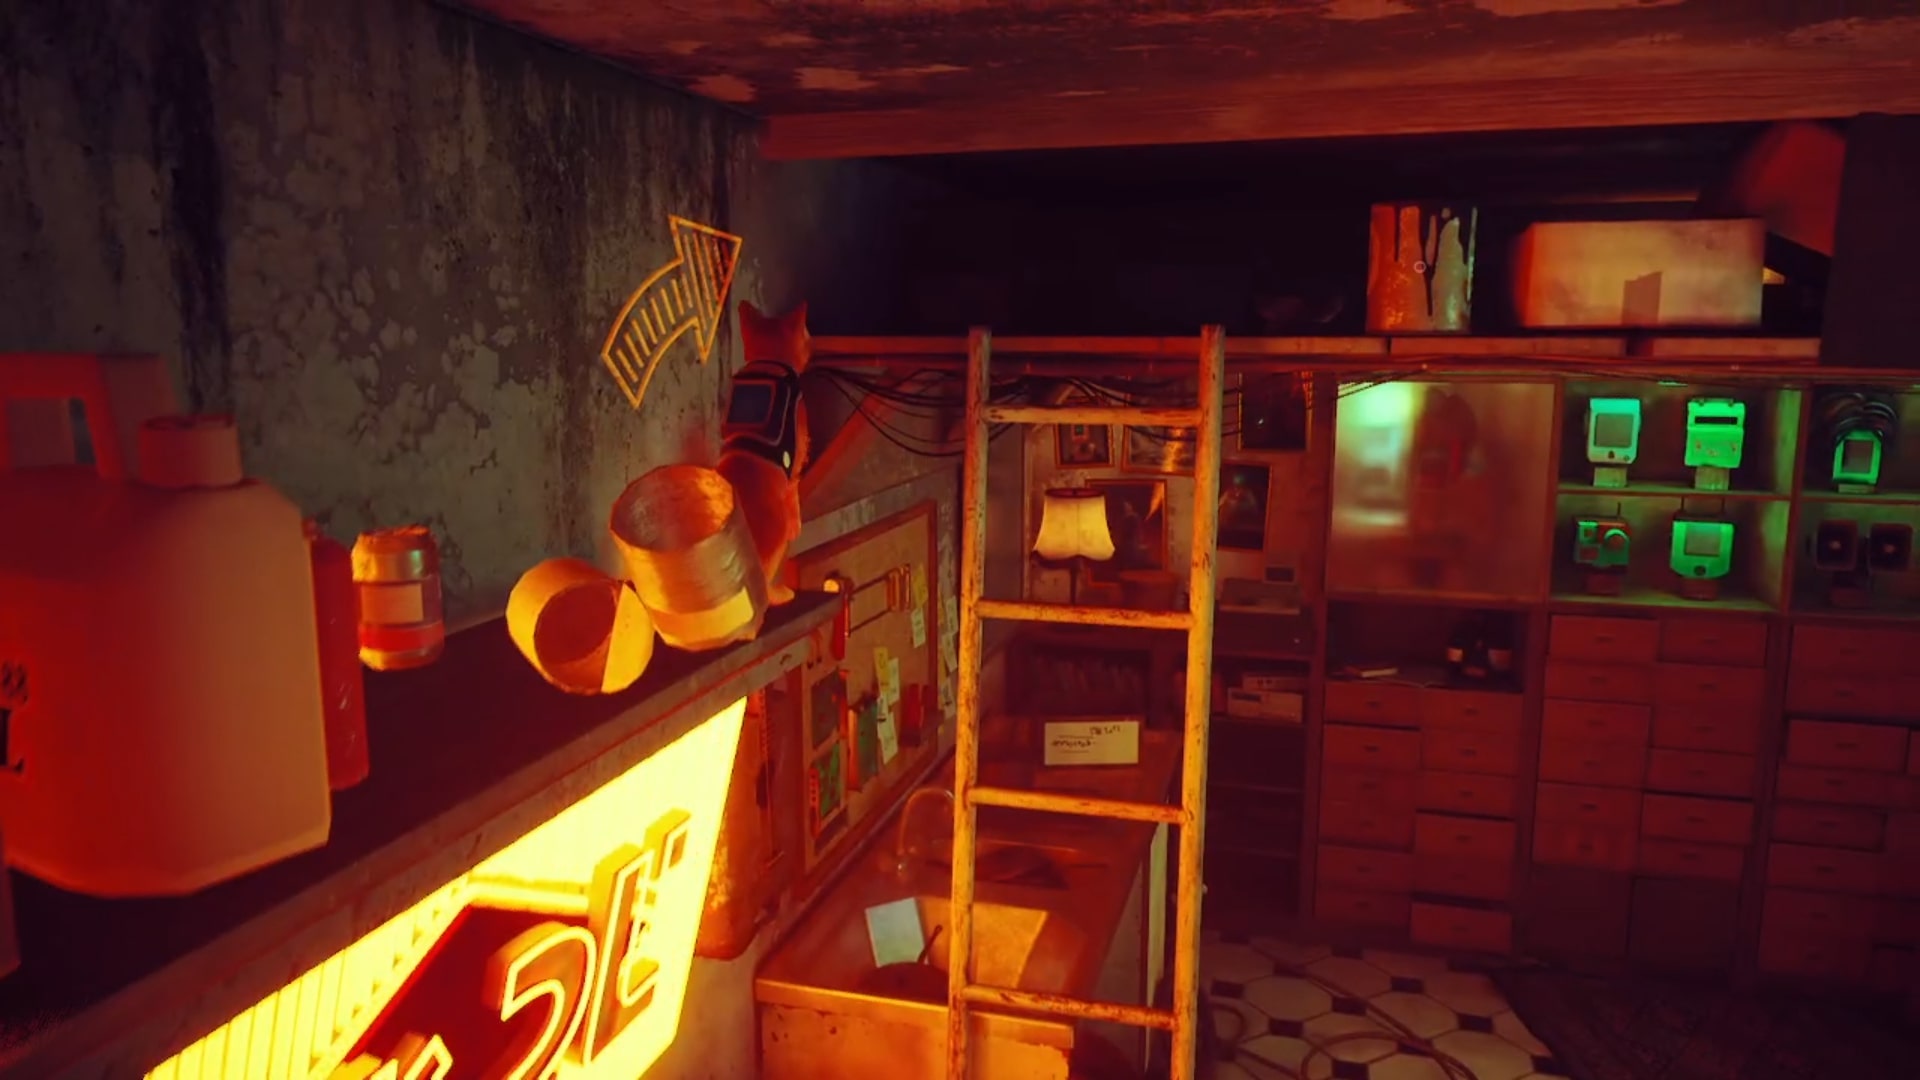 Stray memories guide: The eponymous stray leaping up to a dark loft area from a shelf above the yellow neon sign in the barbershop, knocking empty jars over in the process.